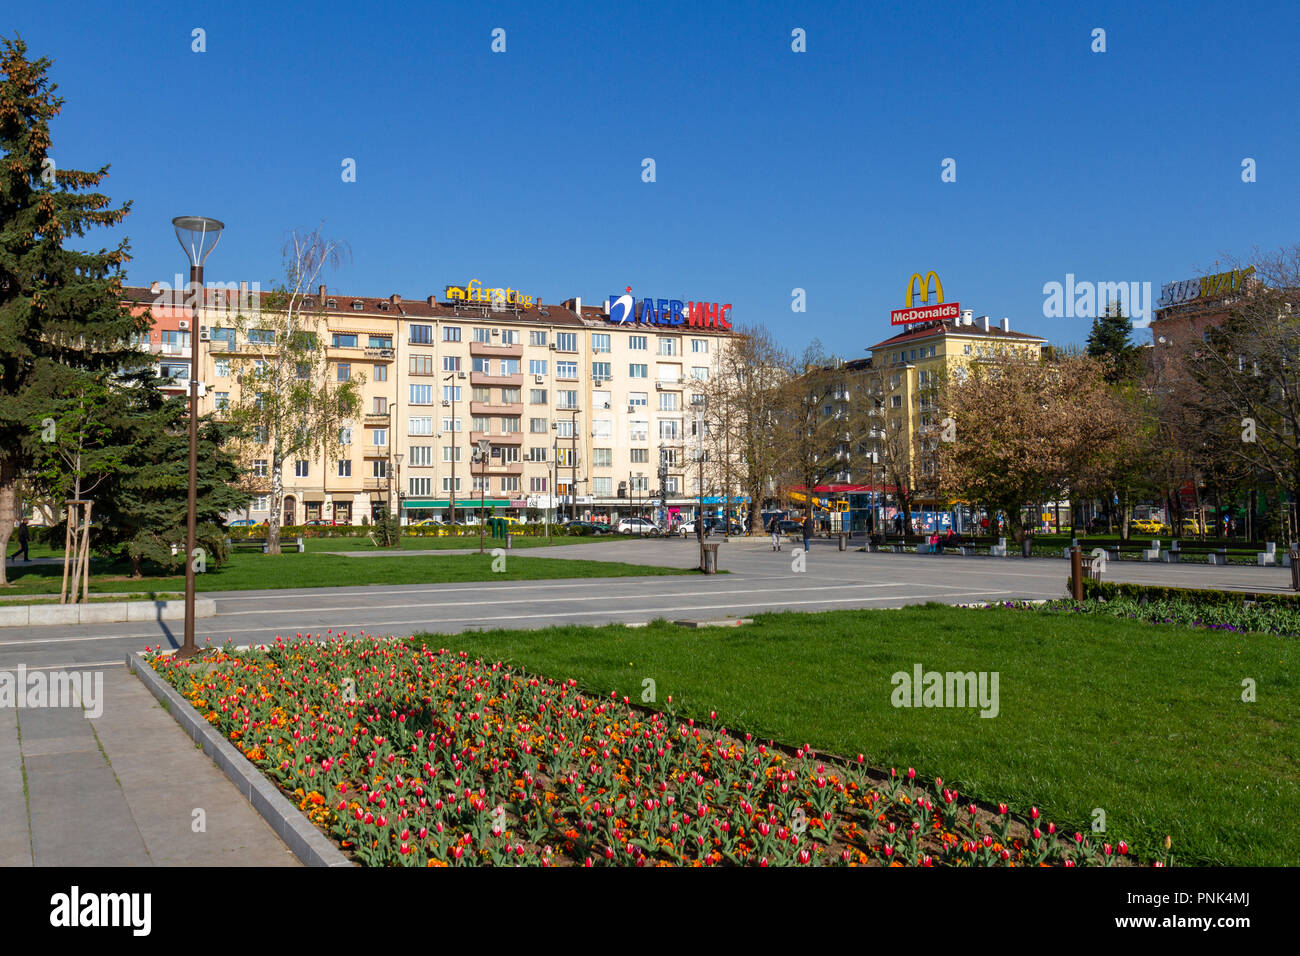 General view of residential tower blocks lining Park National Palace of Culture in central Sofia, Bulgaria. Stock Photo